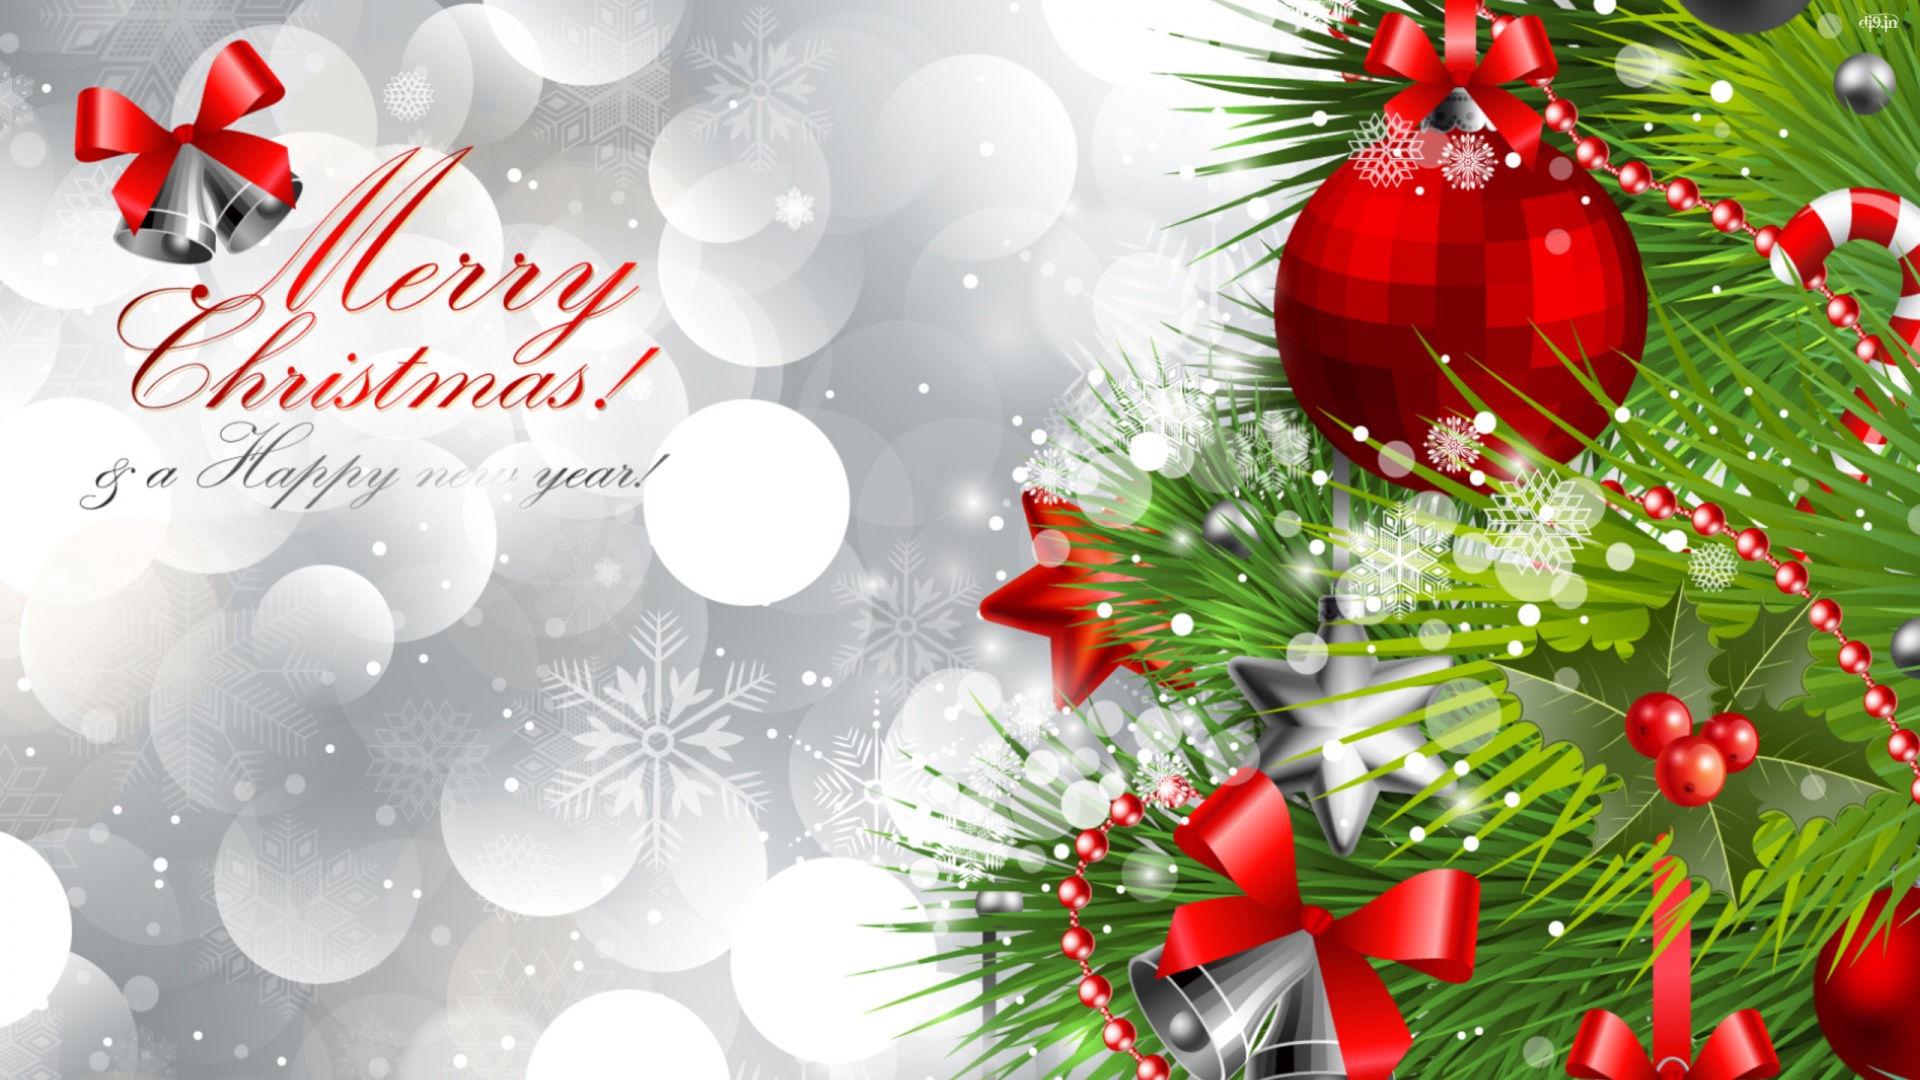 Images Of Merry Christmas Wallpaper on